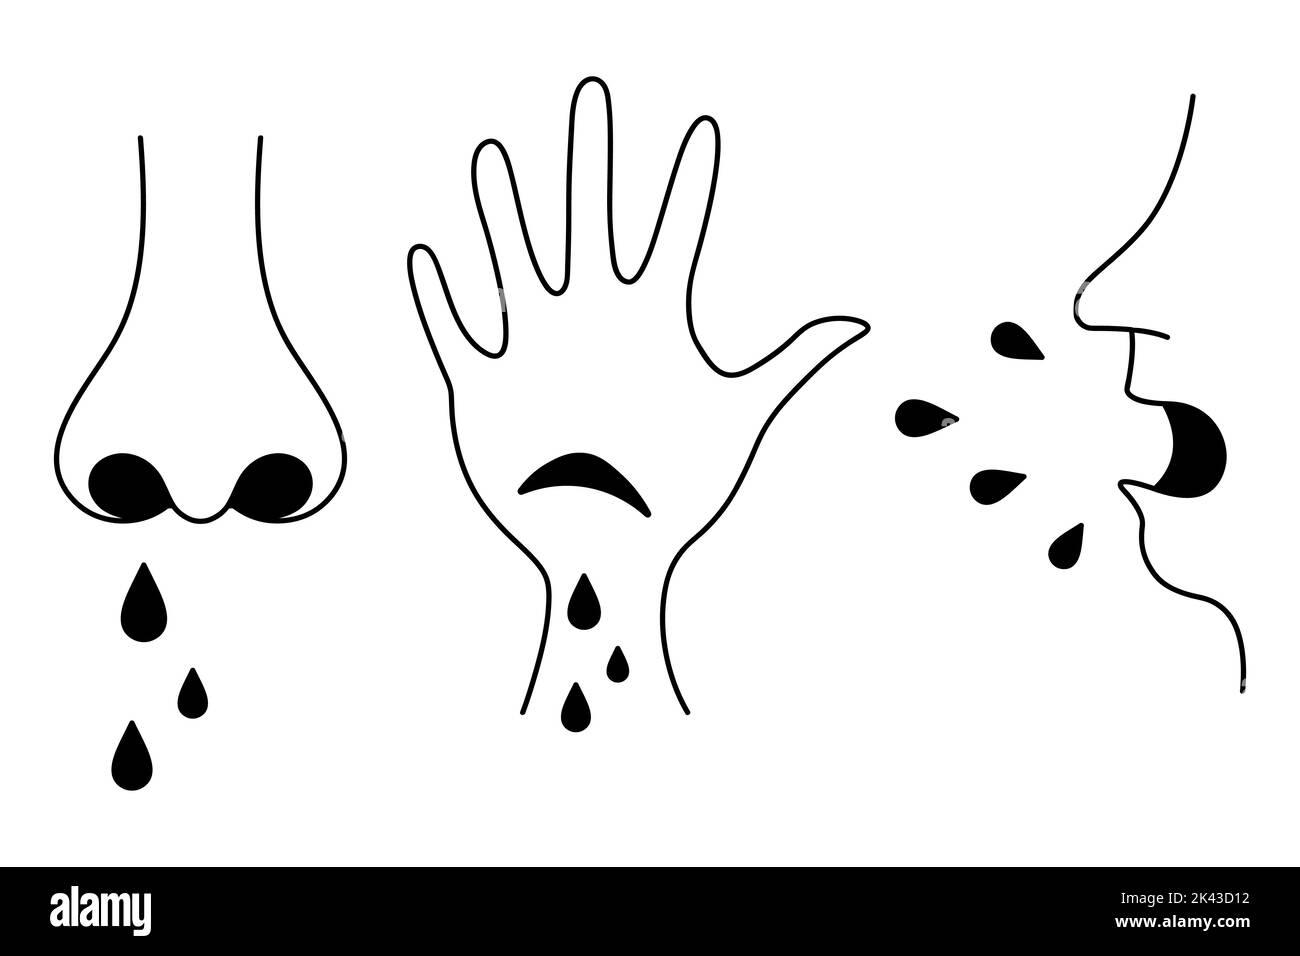 Coughing and sneezing, a cut on the palm, a wound with drops of blood, a human nose front view, runny nose. Silhouettes of splashing drops. Stock Vector